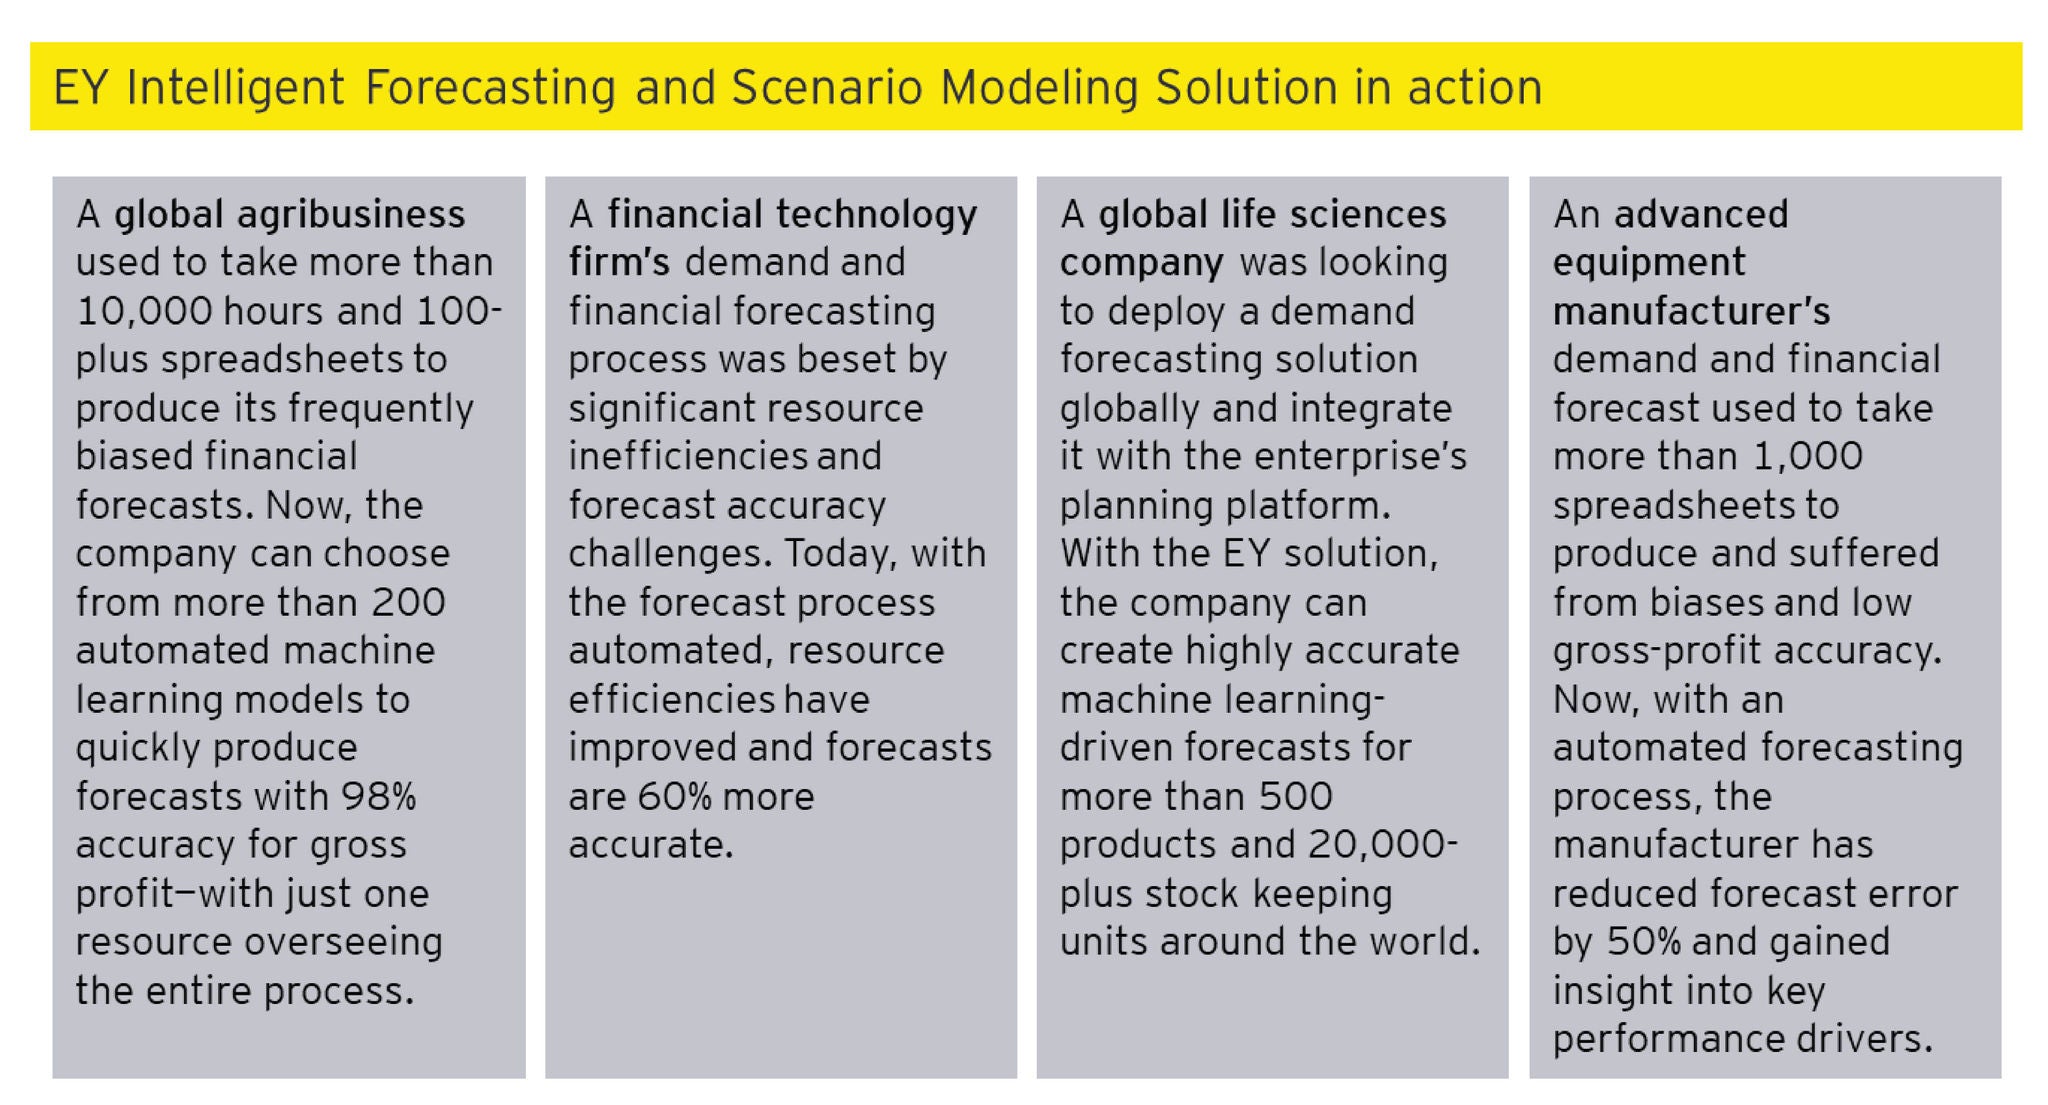 EY Intelligent forecasting and scenario modeling in action